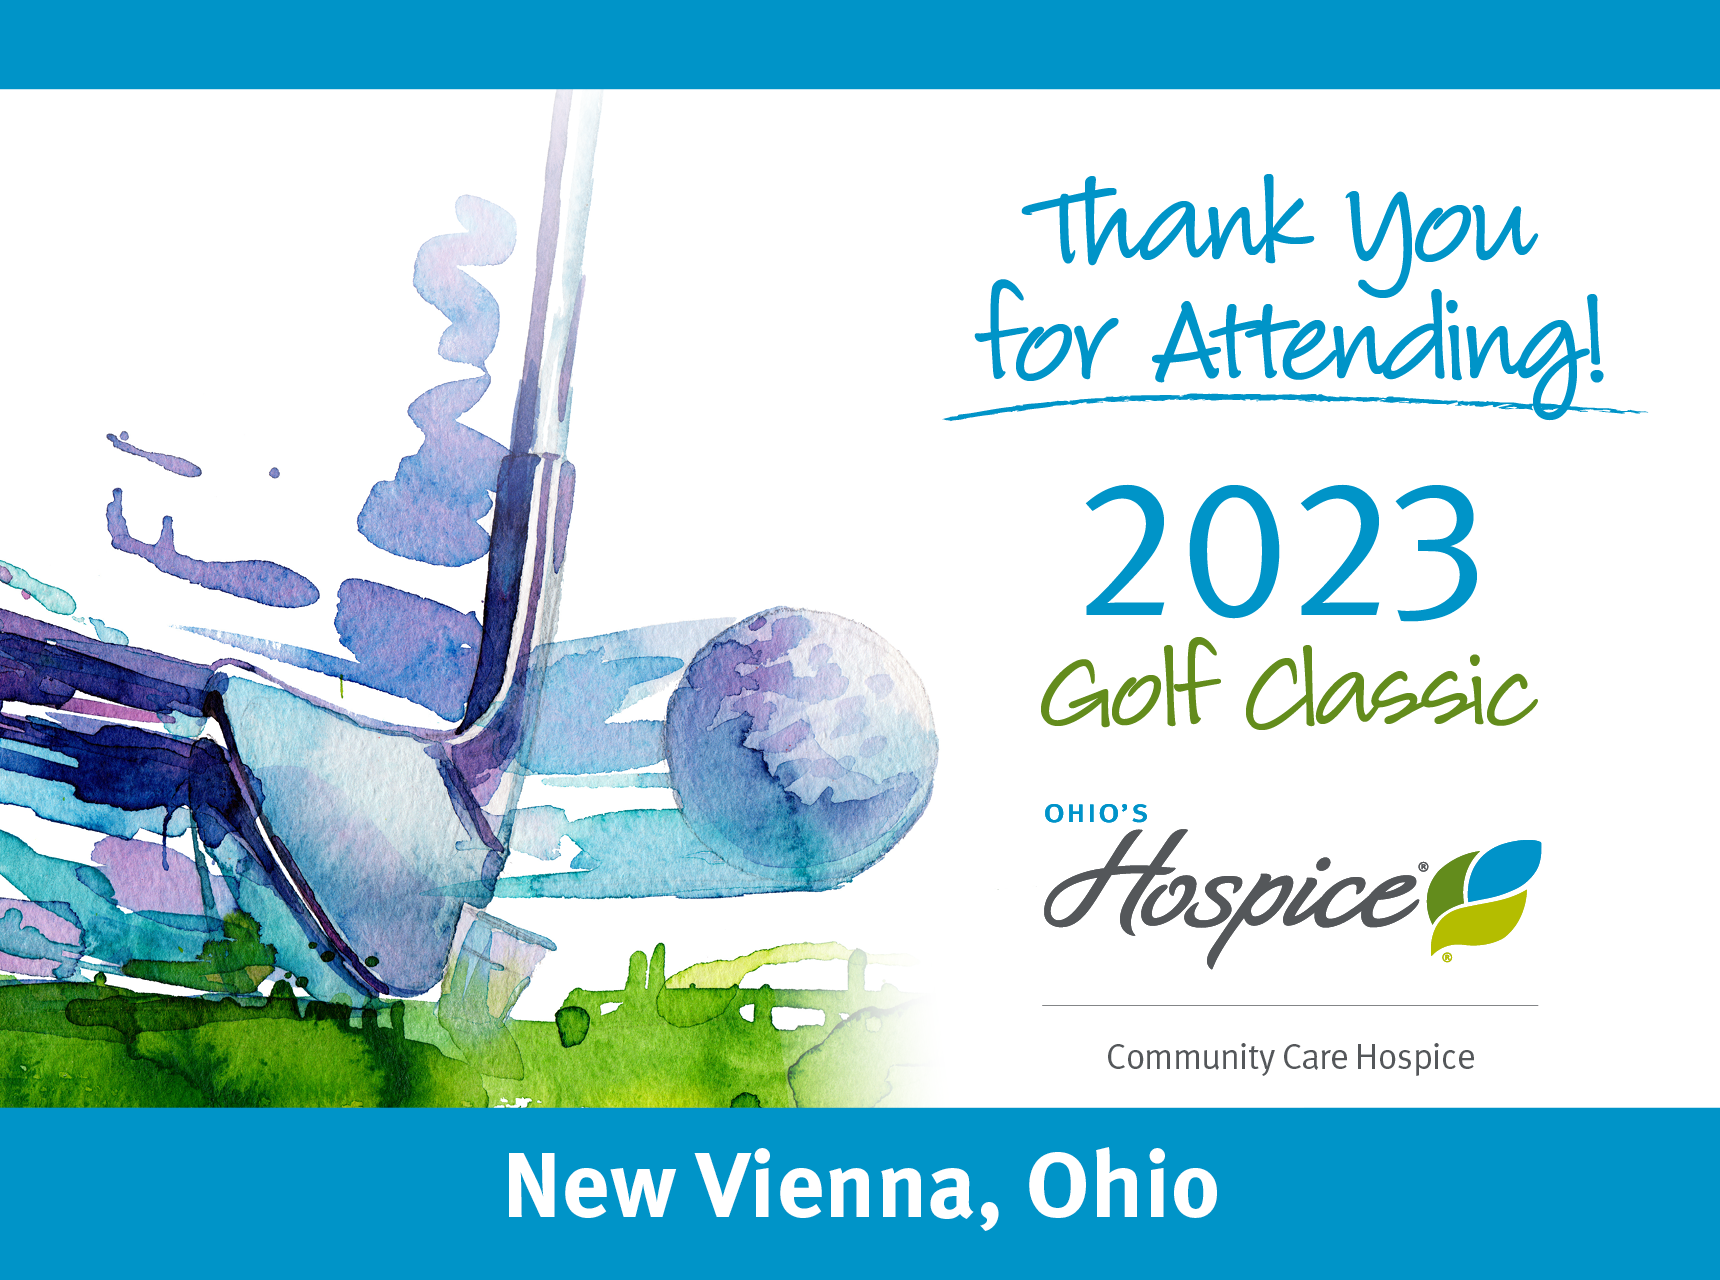 Thank you for attending! 2023 Golf Classic. Ohio's Hospice Community Care Hospice